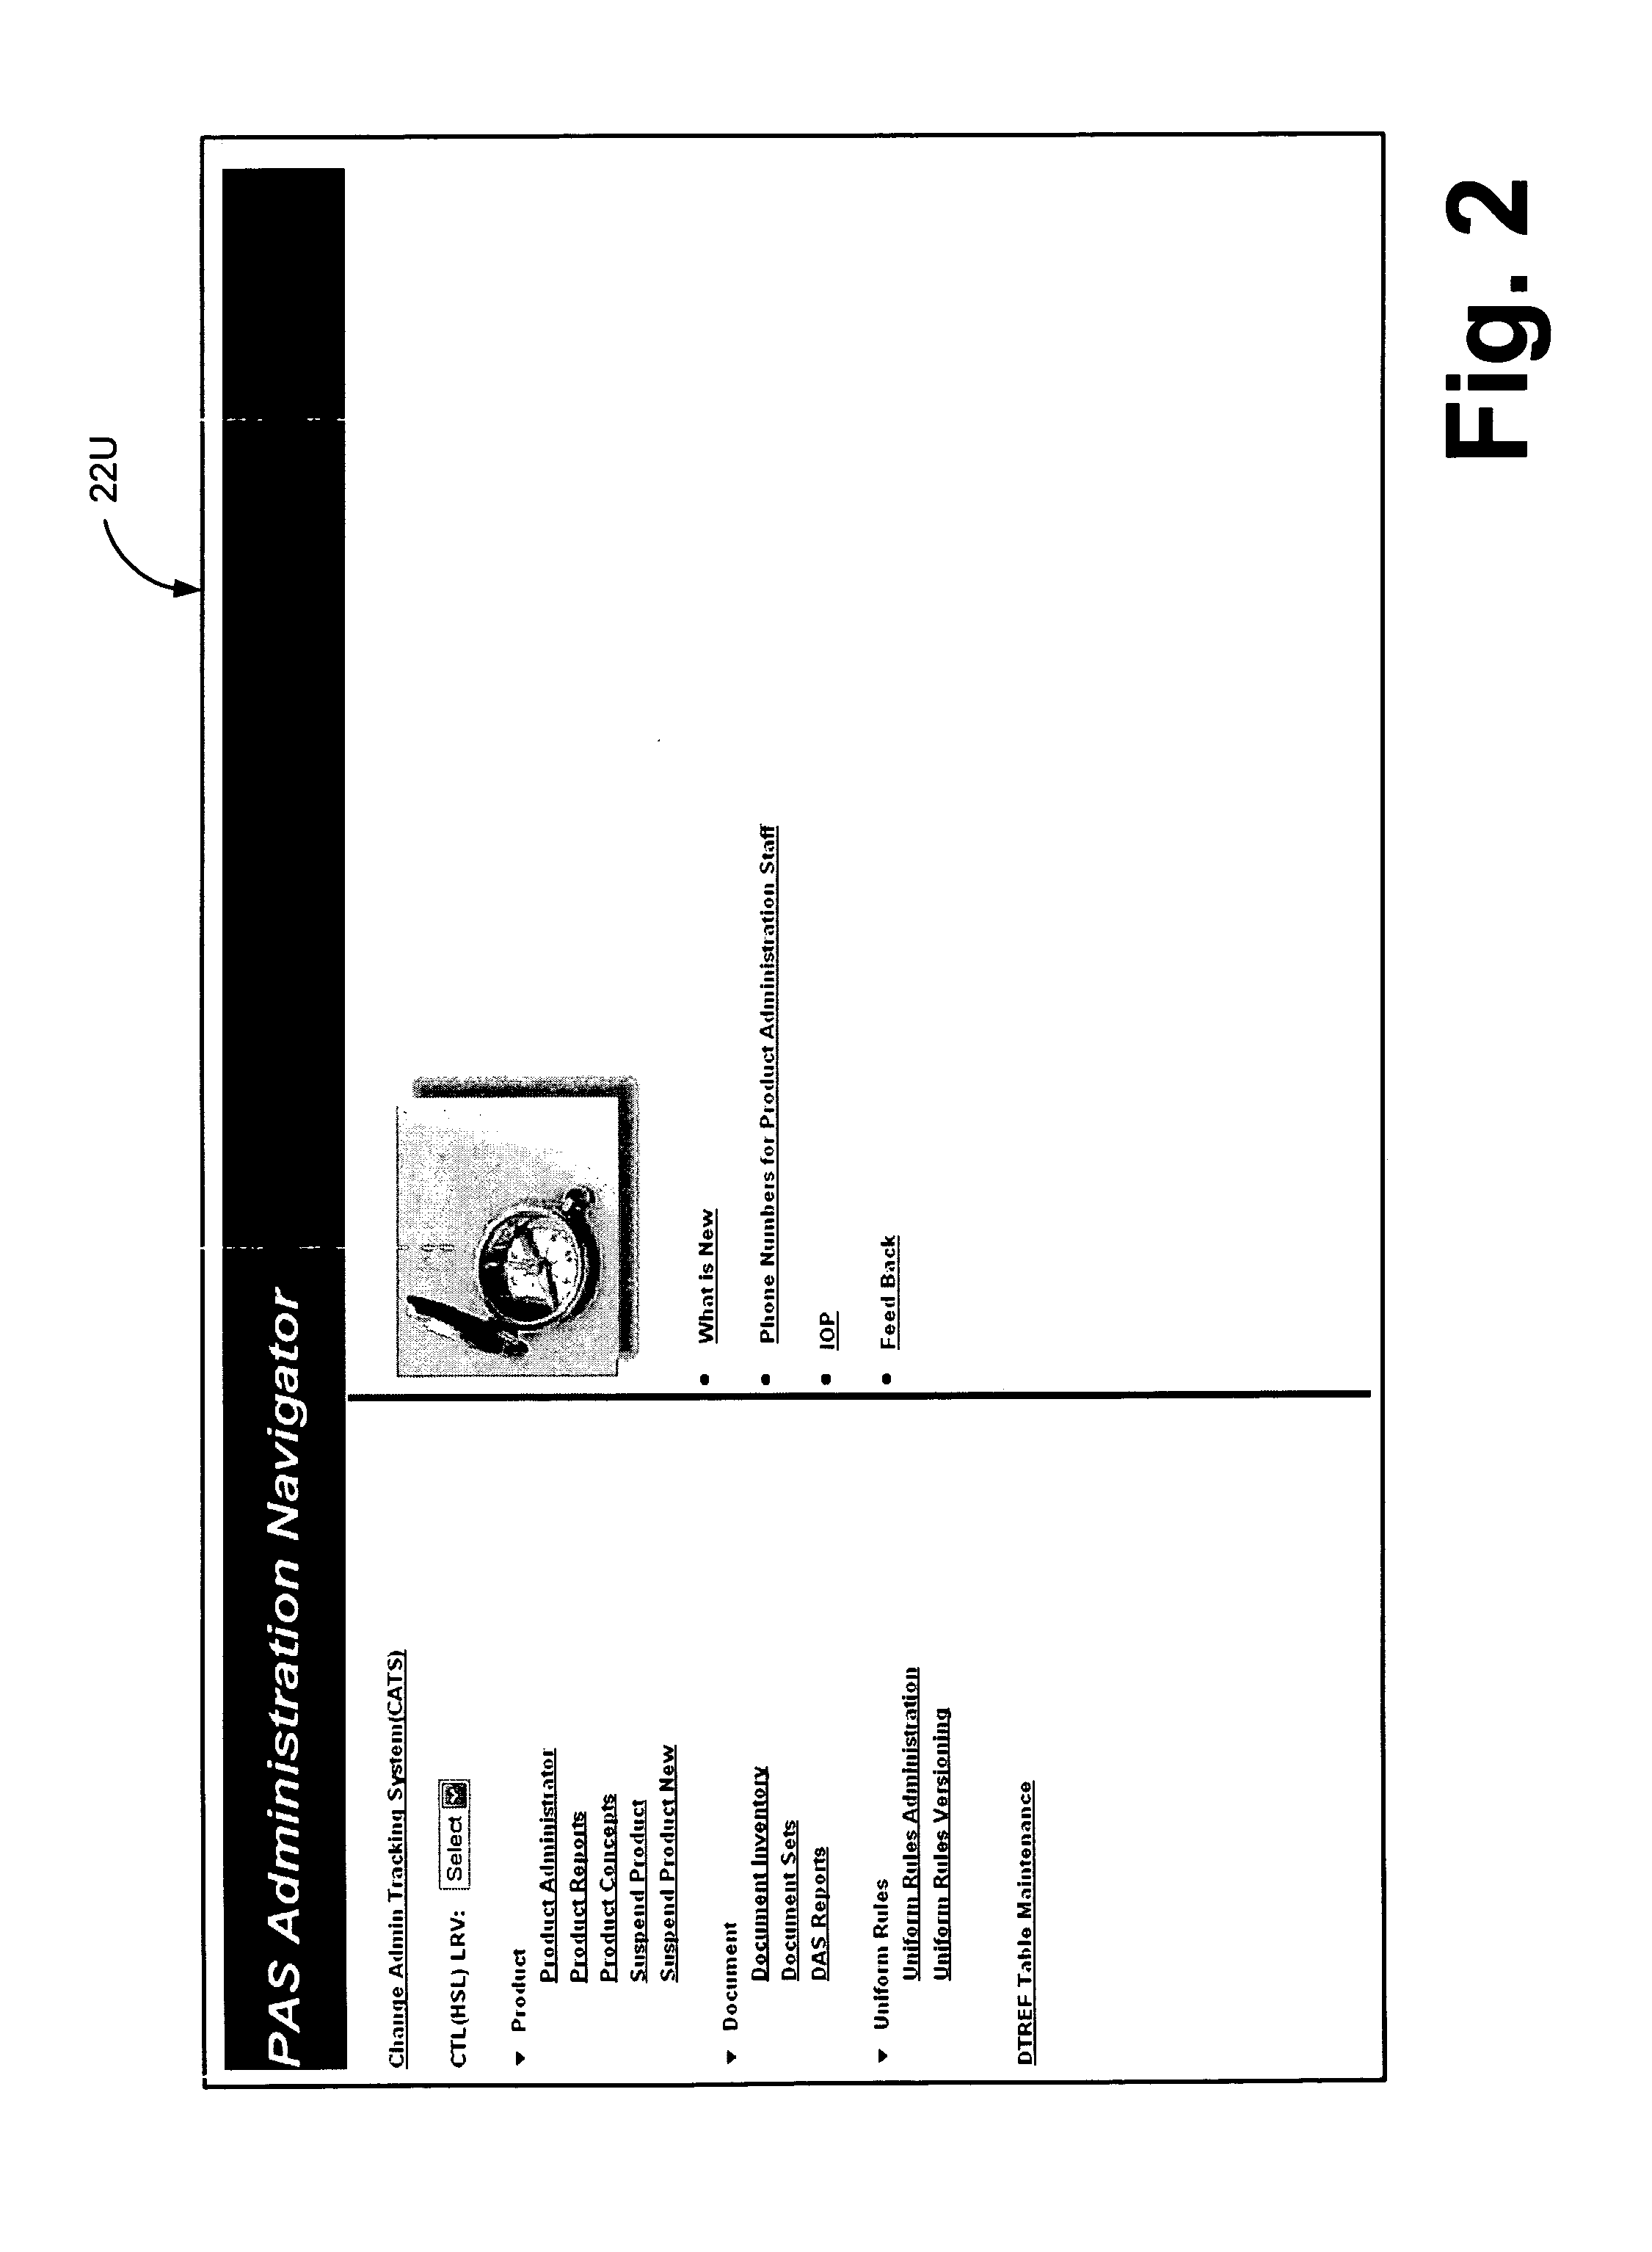 System and method of managing business processes